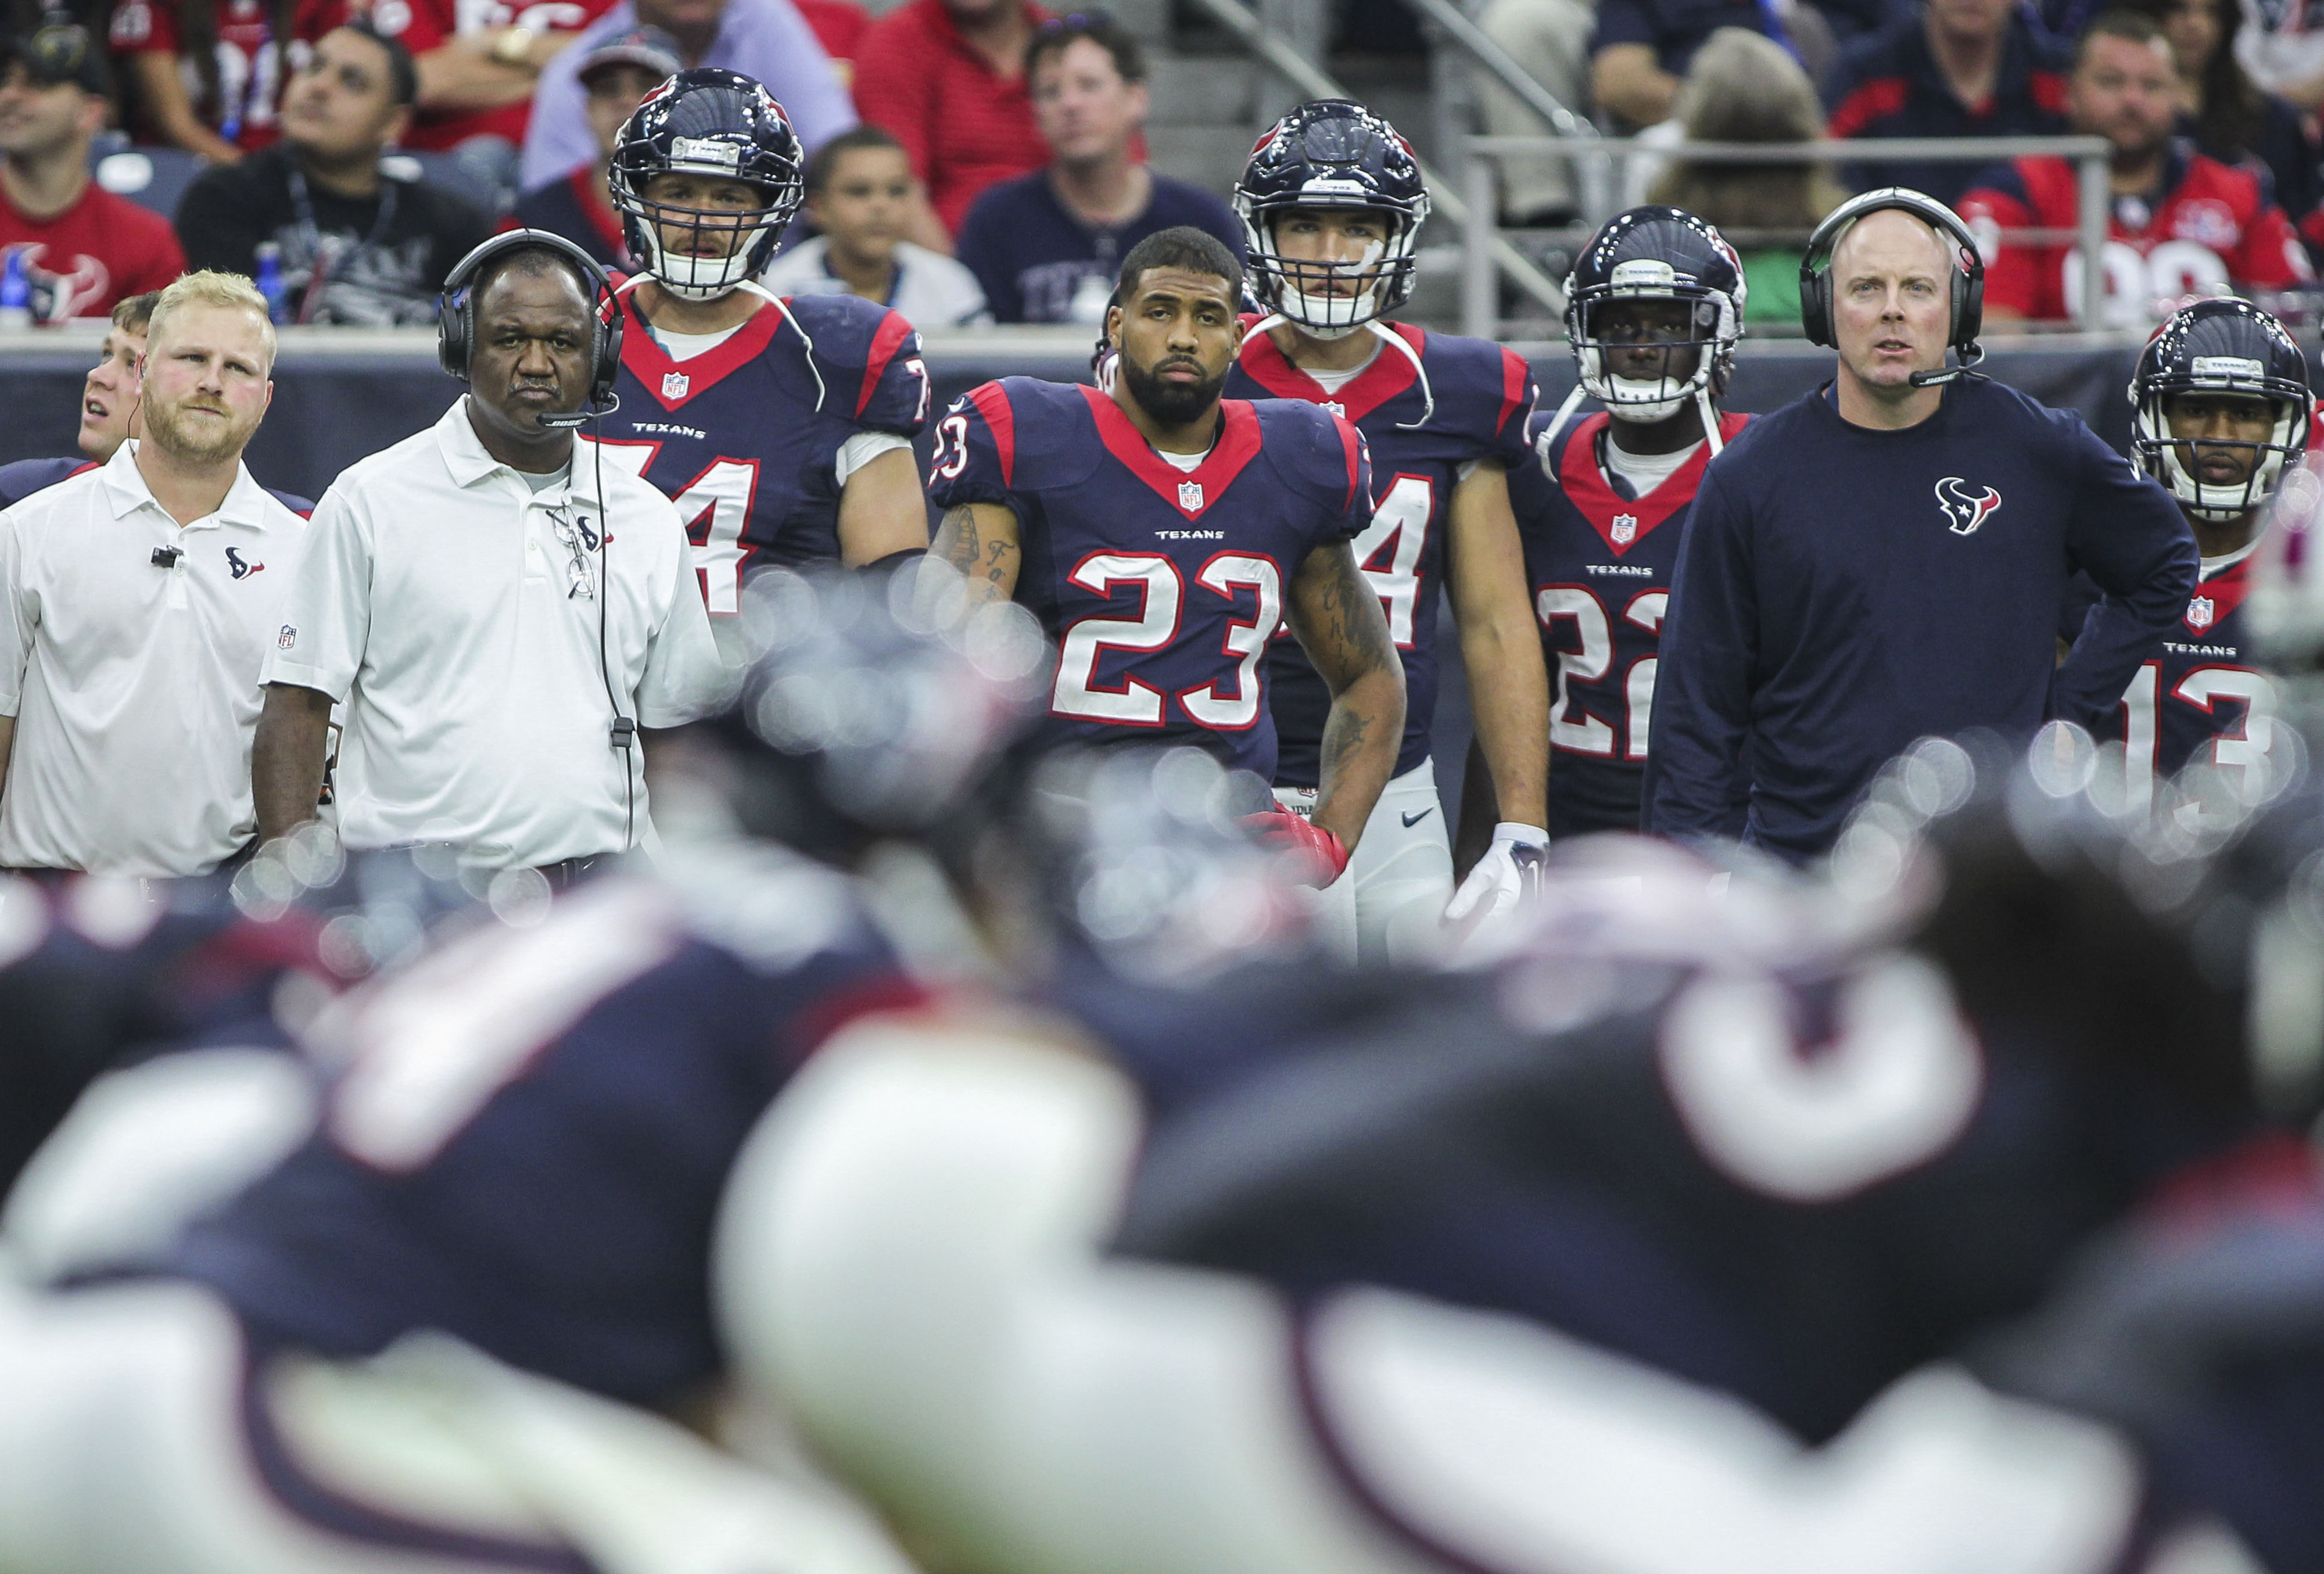 Arian Foster watched about half of the offense's snaps from the sidelines.